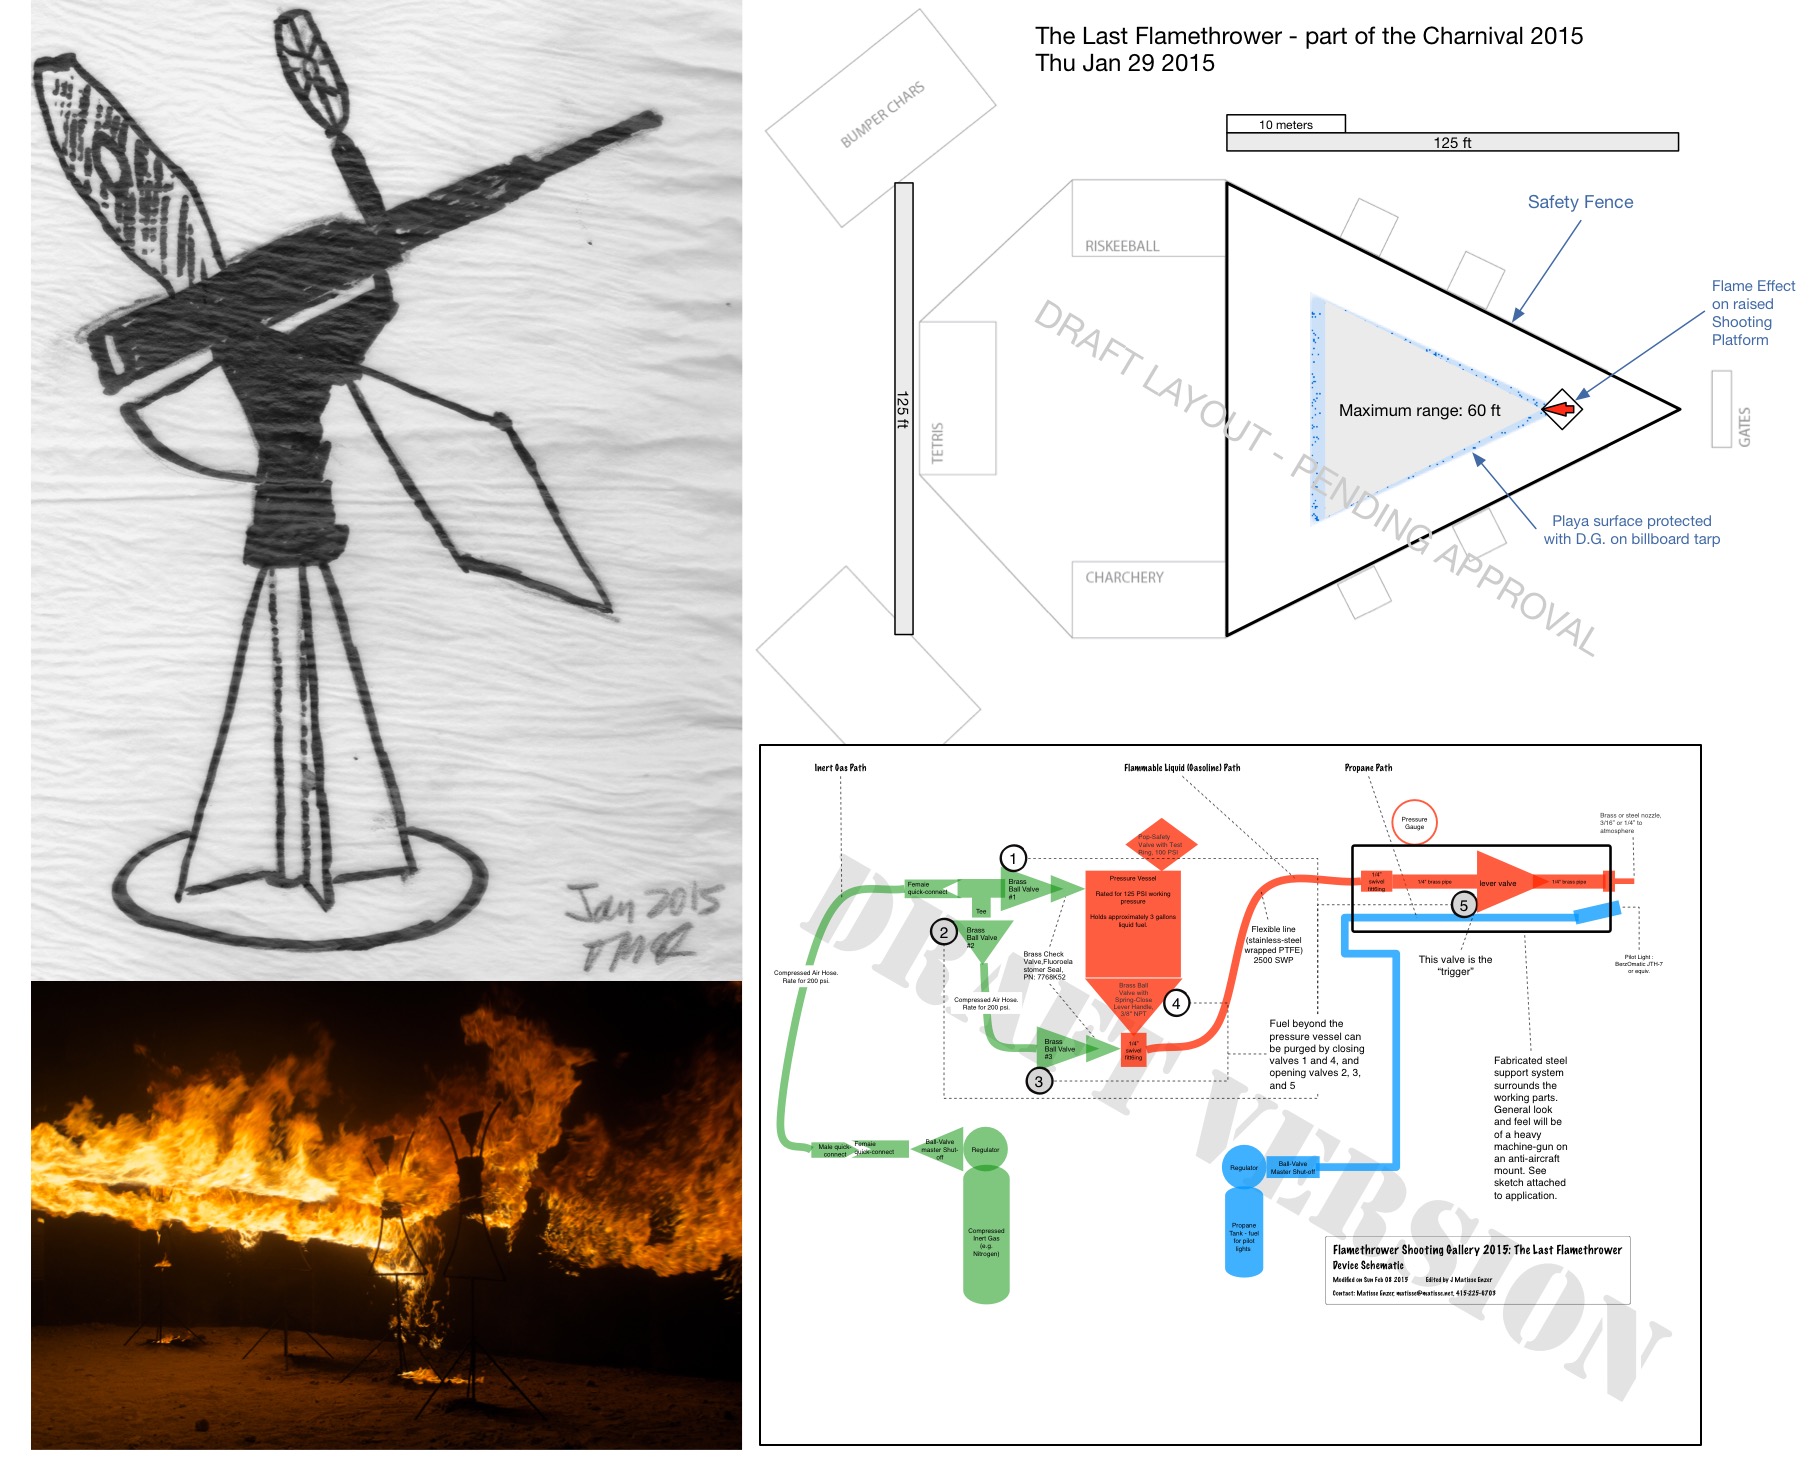 Composite image of Last Flamethrower drawings and photos for 2015